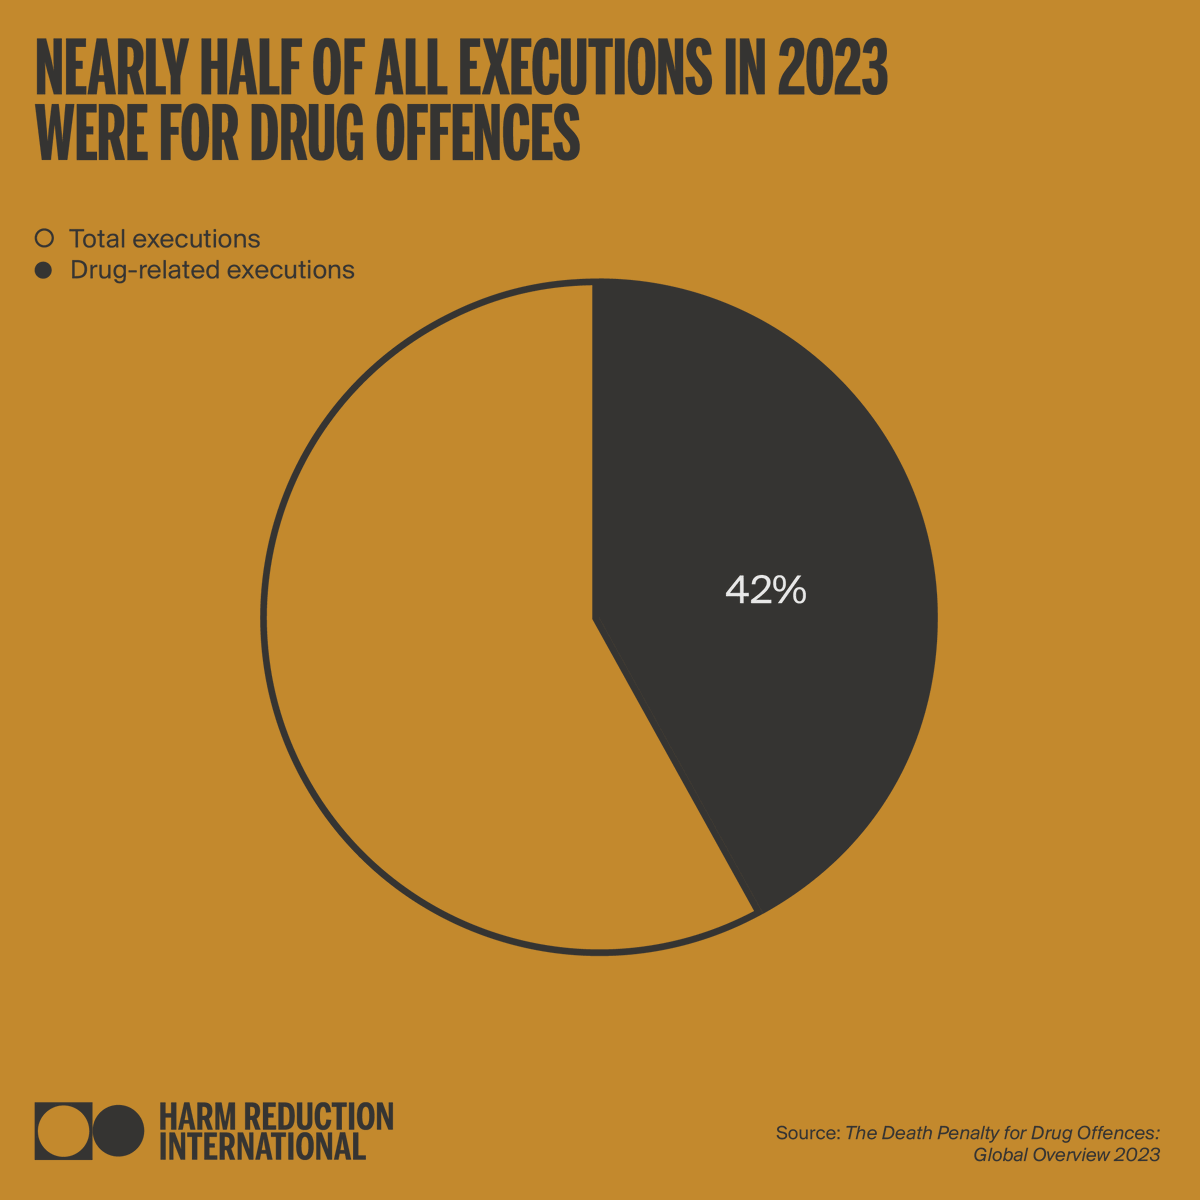 NEW: Half of all global executions that took place in 2023 were for drug-related charges. This is a flagrant violation of international human rights standards. See our full report on the #deathpenalty for drug offences: tinyurl.com/deathpenaltyre…